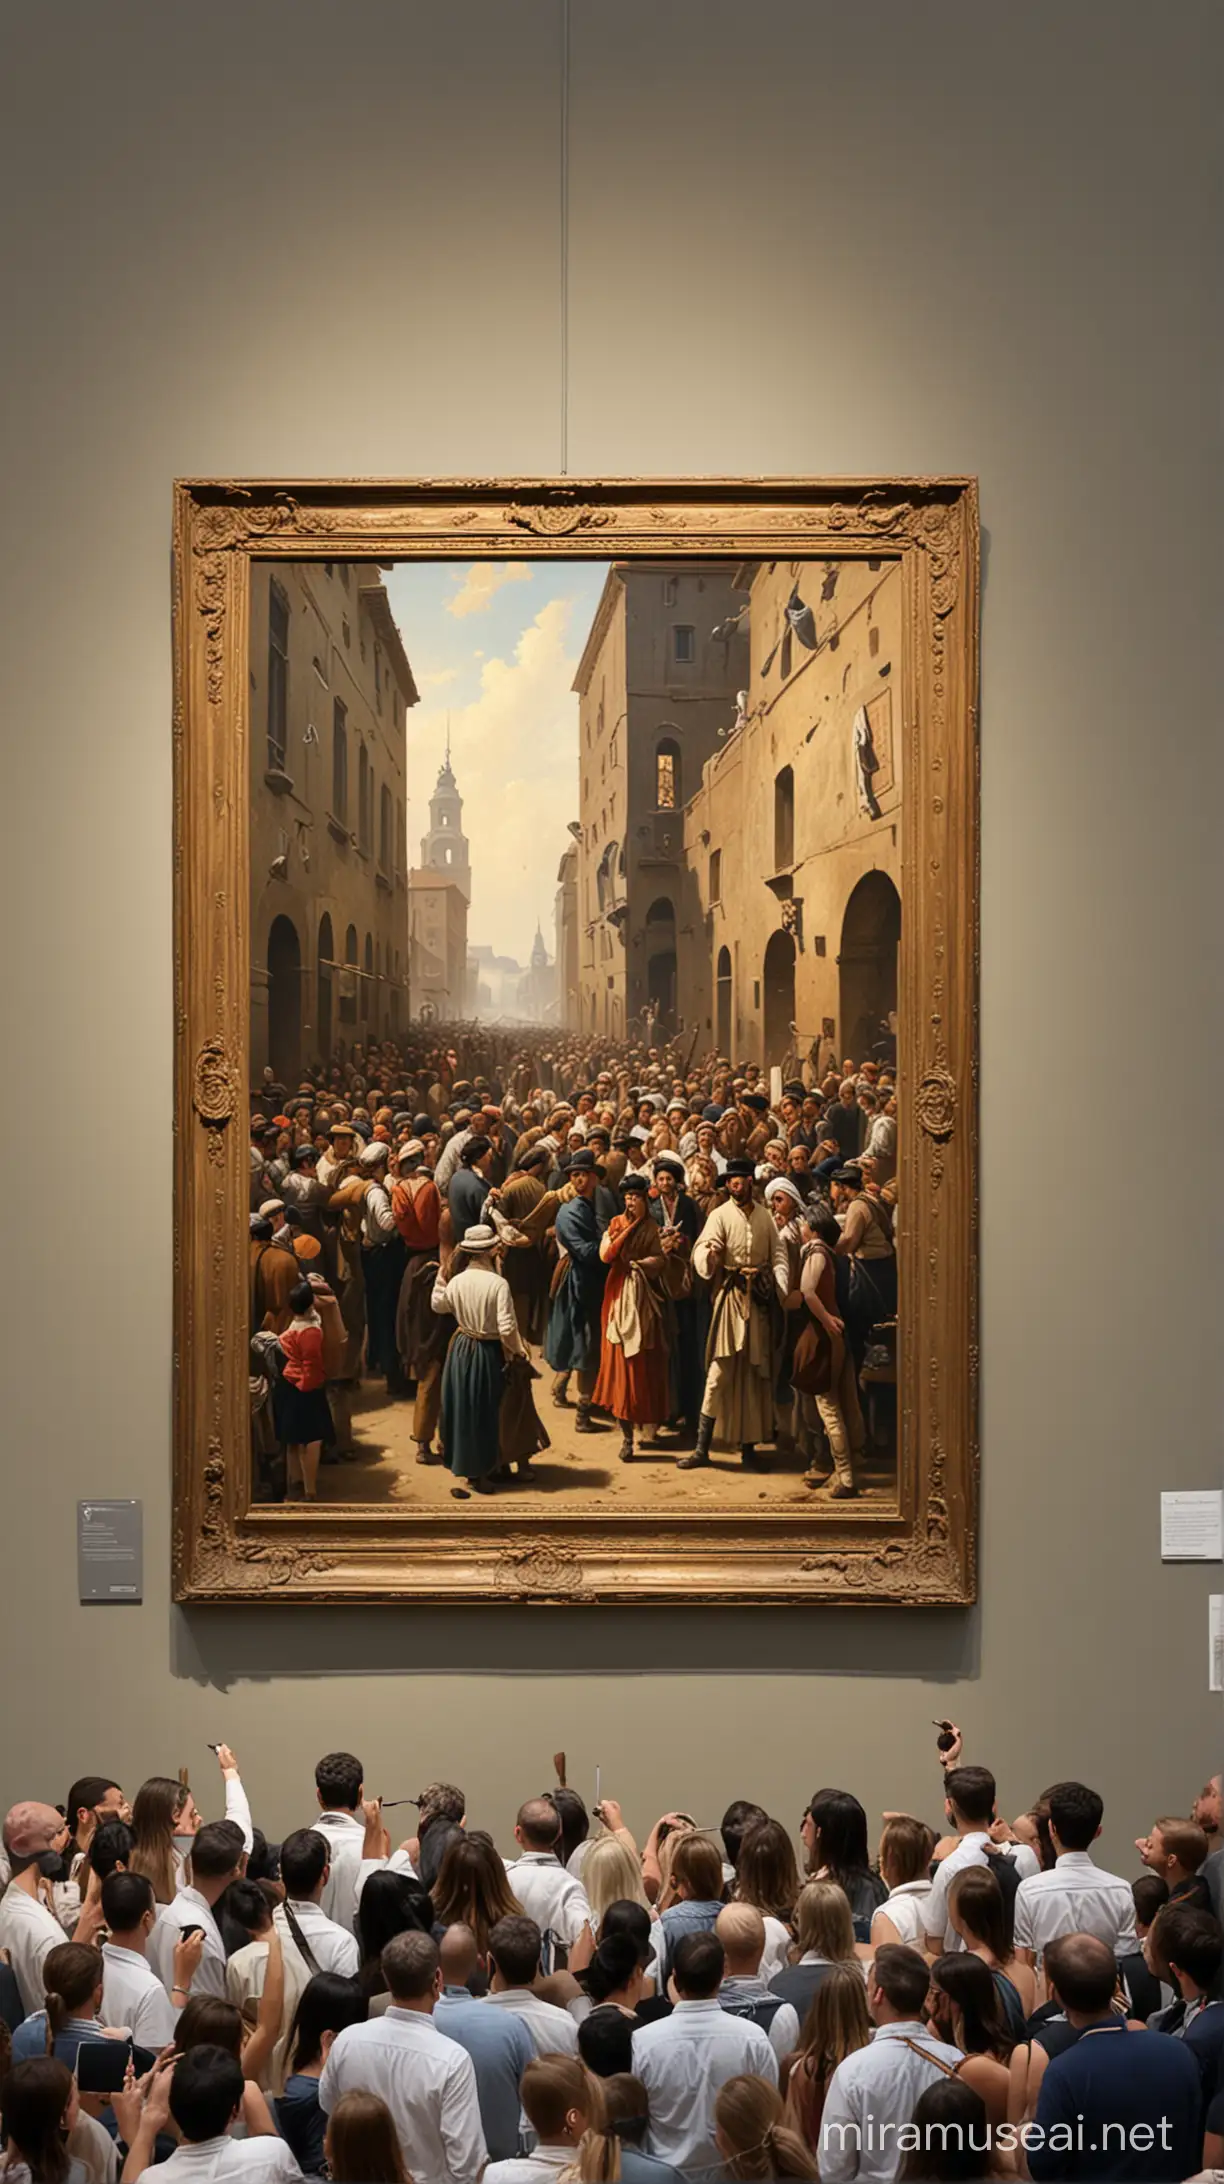 Crowd Admiring Painting in Museum Exhibition